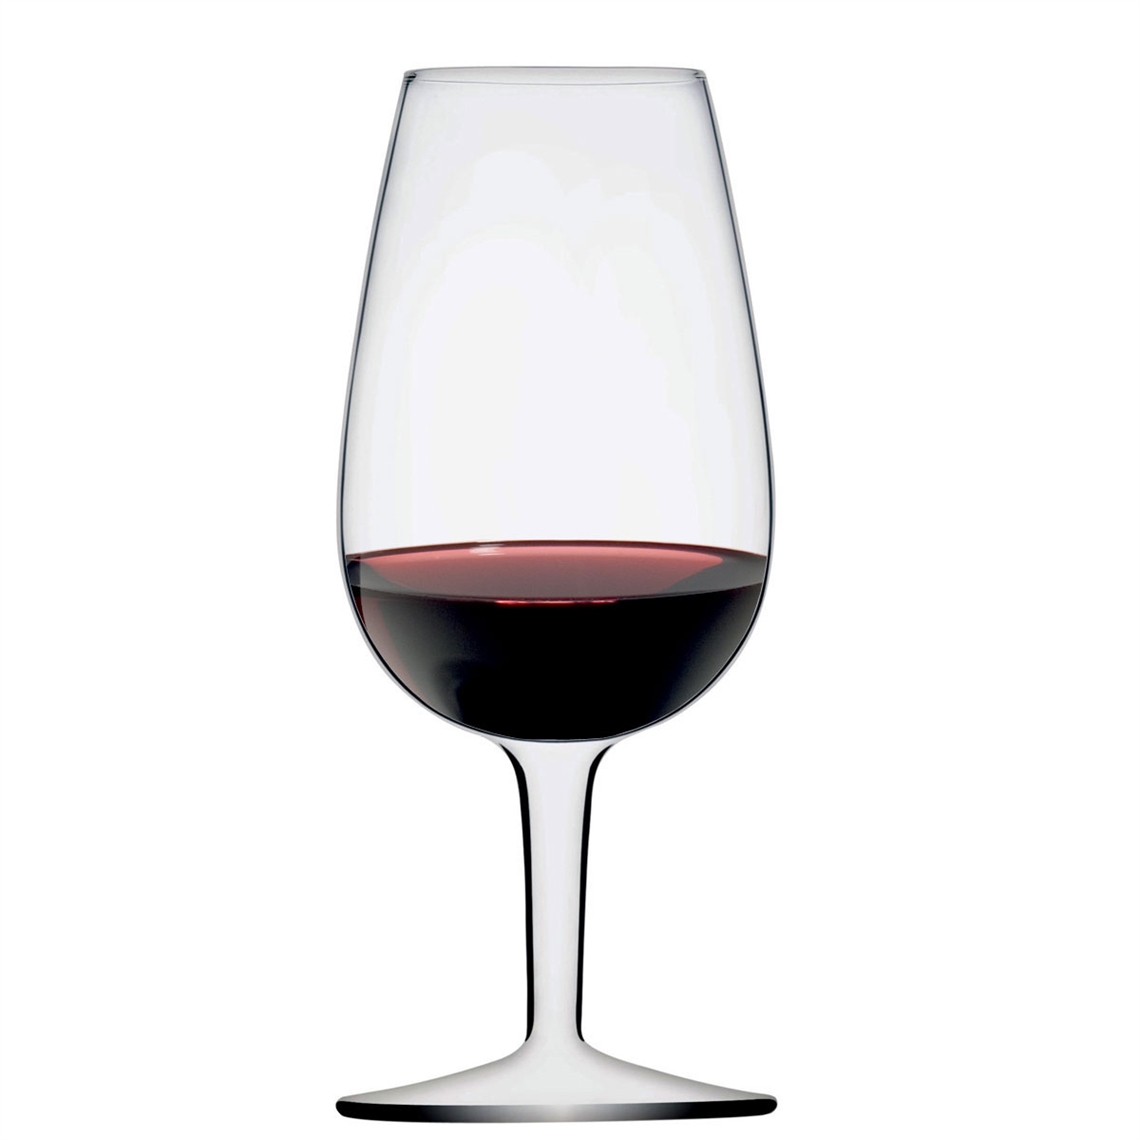 View more water glasses / tumblers from our Wine Tasting Glasses range